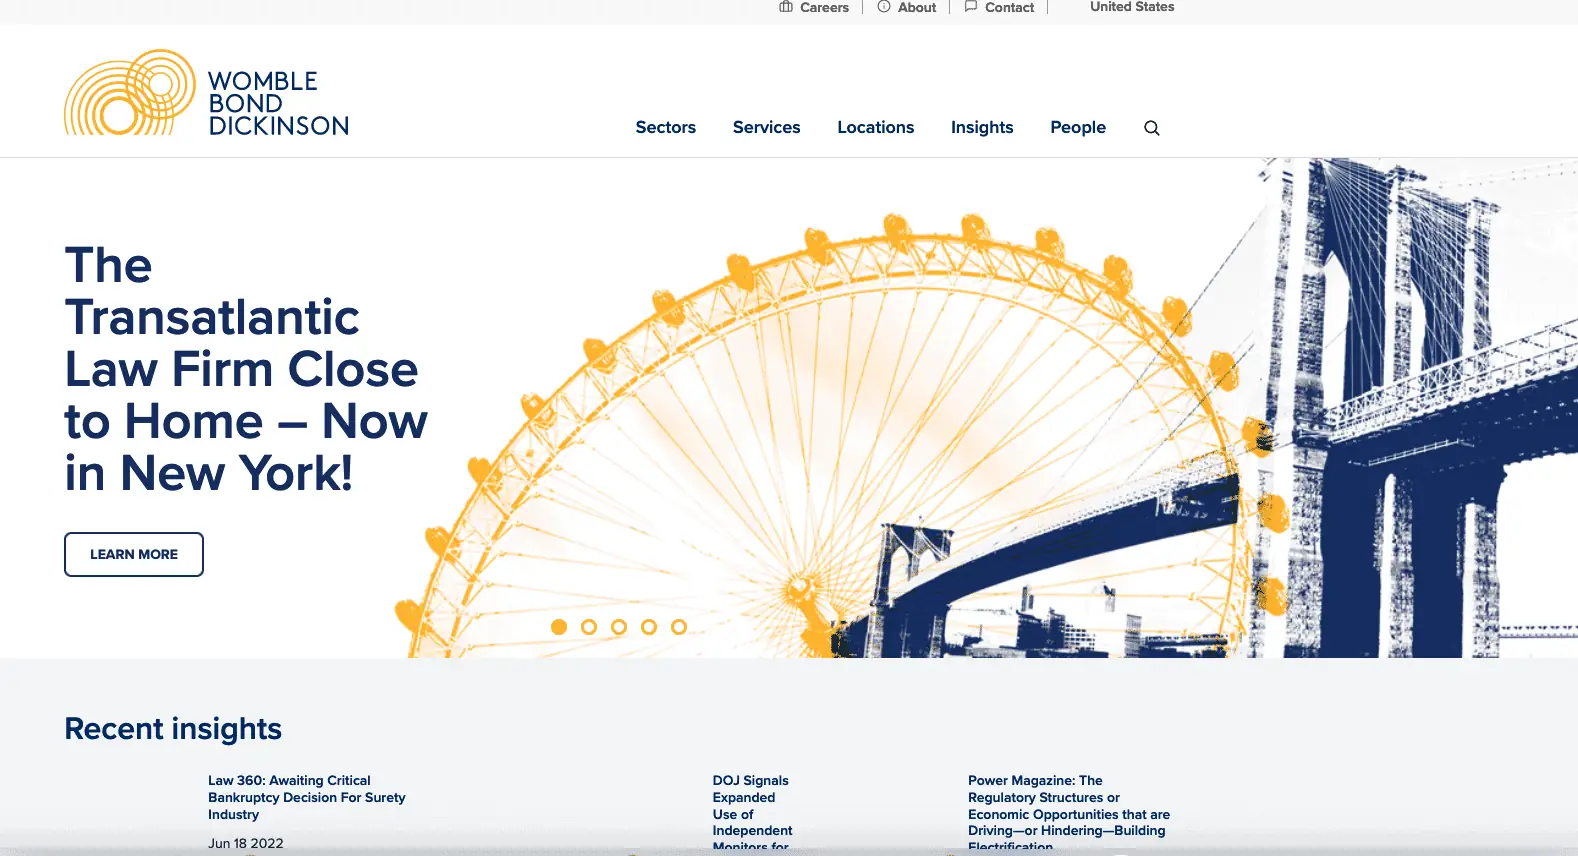 The website for the mobile law firm in New York utilizing marketing technology.